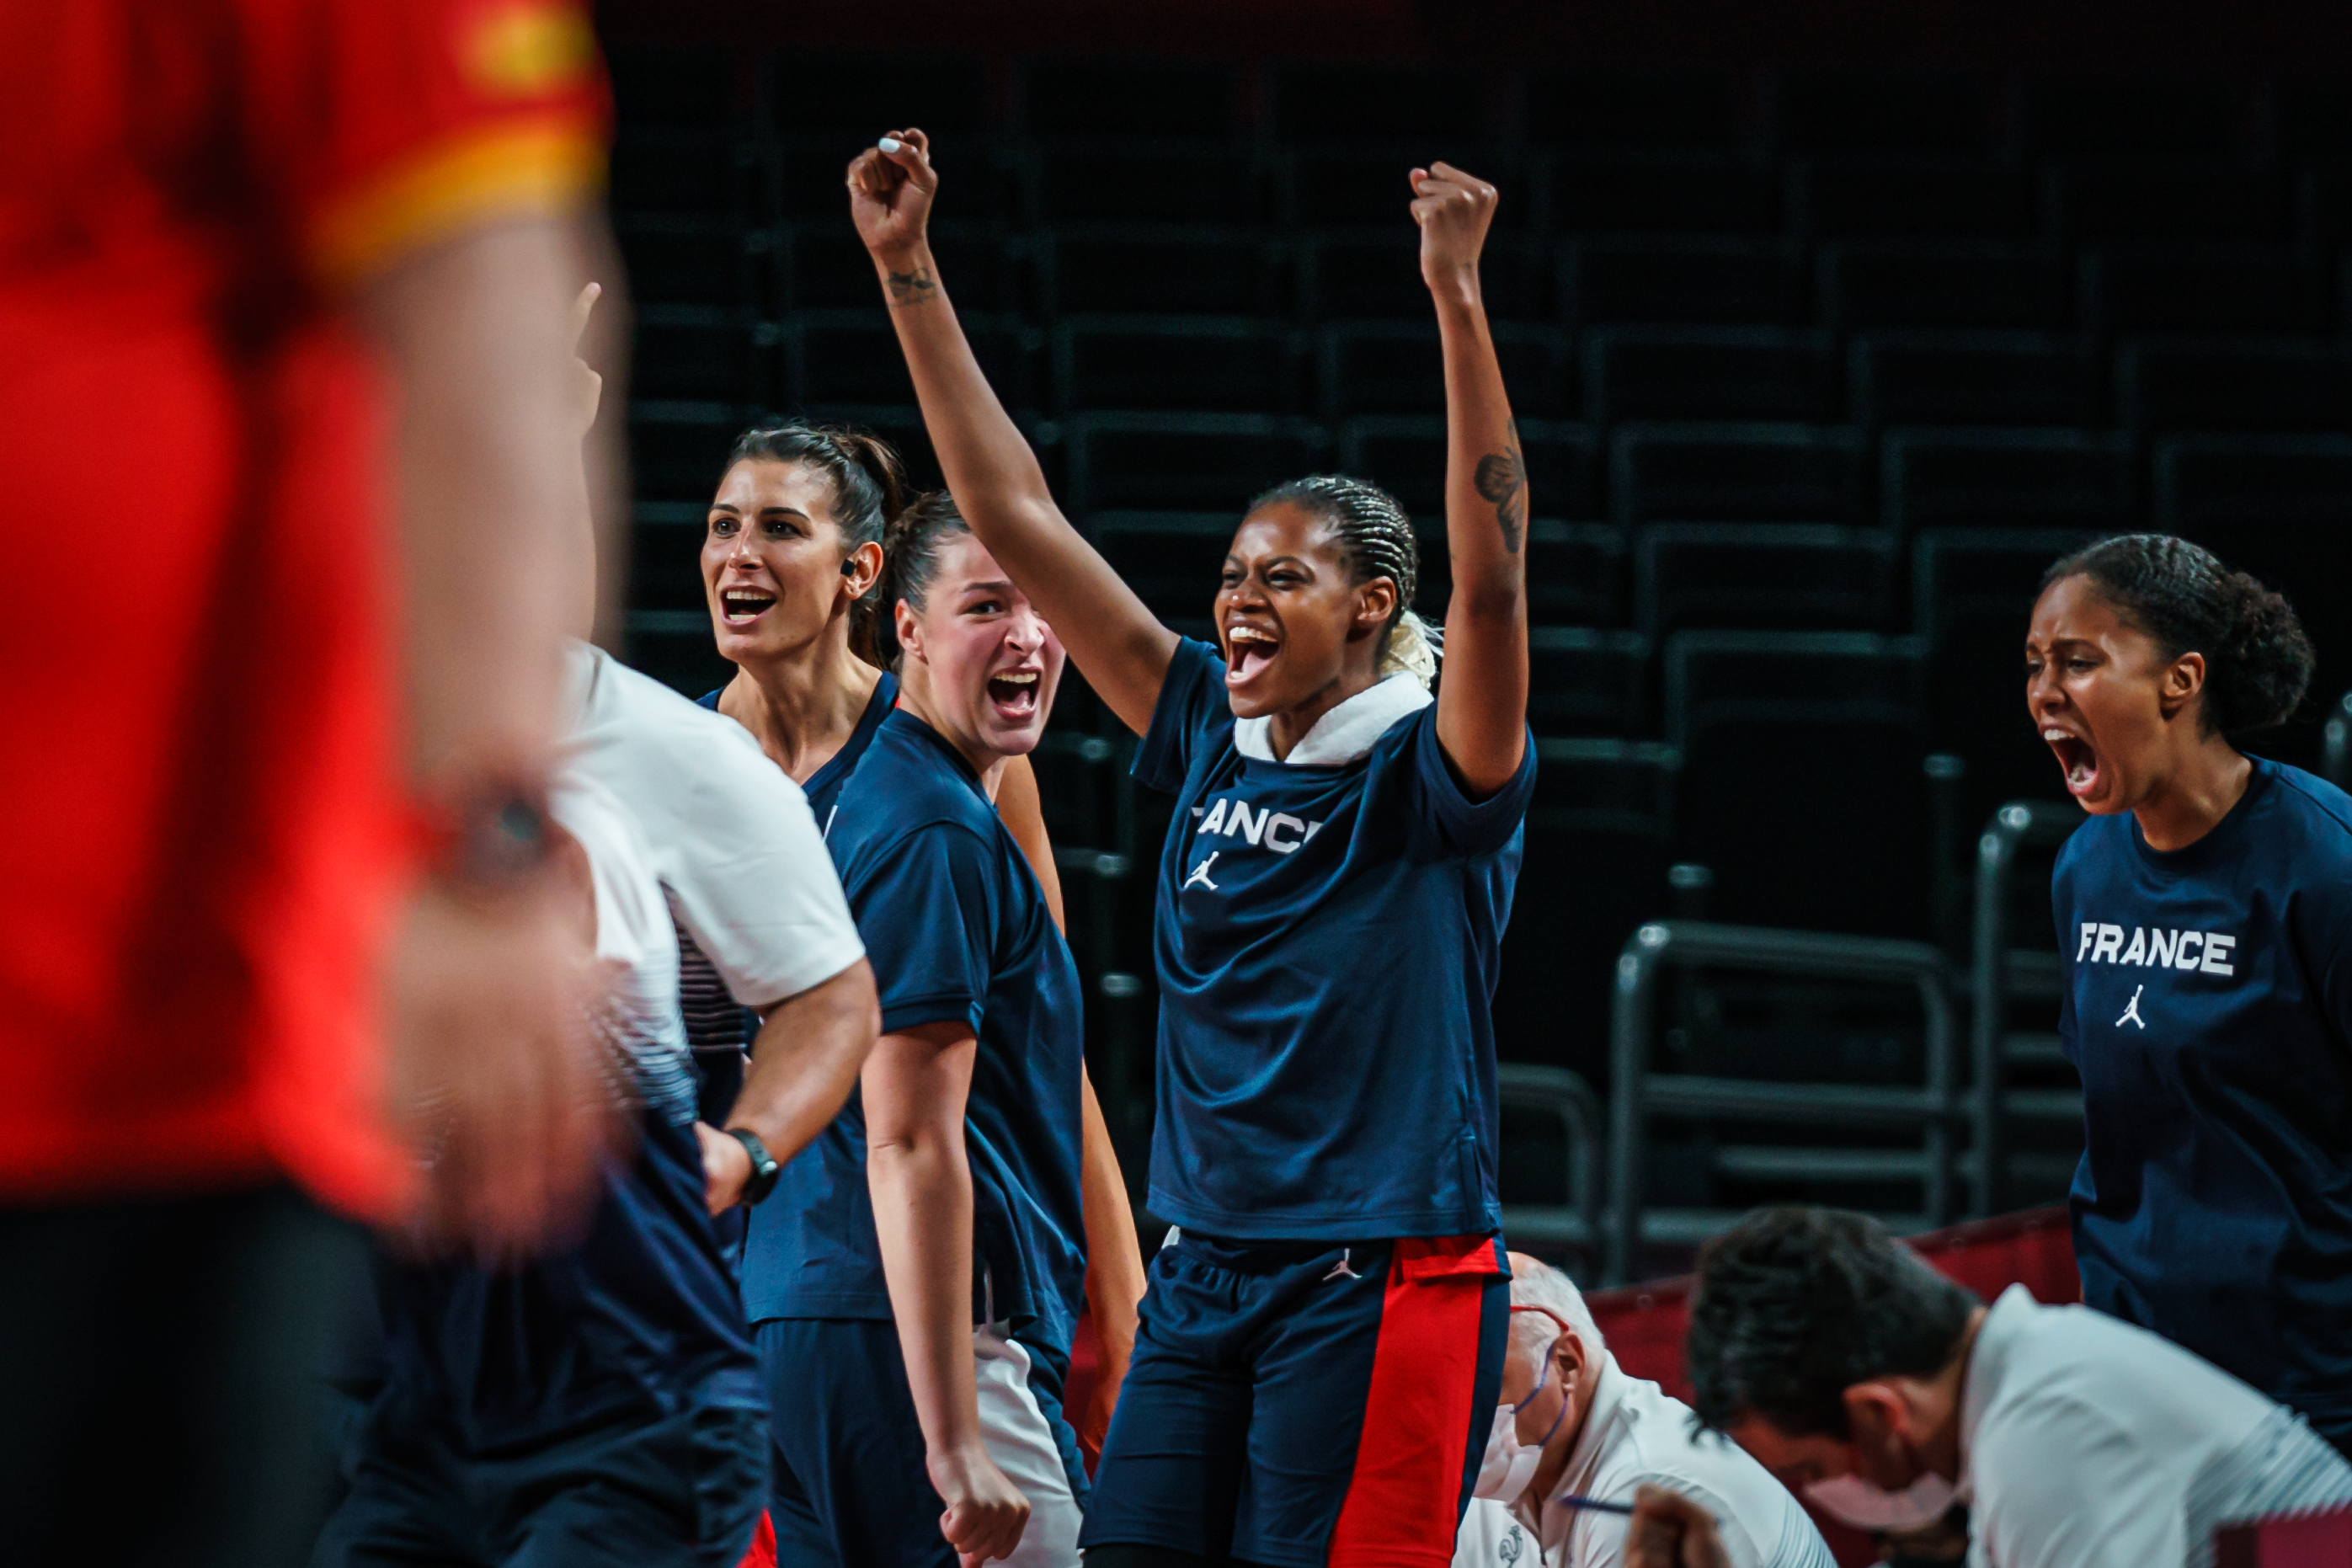 FIBA on X: "The France bench erupts as Marine Johannes gets one to fall  with 0.1 left on the shot clock!!! 🇪🇸 64 🇫🇷 65 ⏱️ 16.6 Q4 Follow live  ➡️ https://t.co/pzGsG0mk0m #